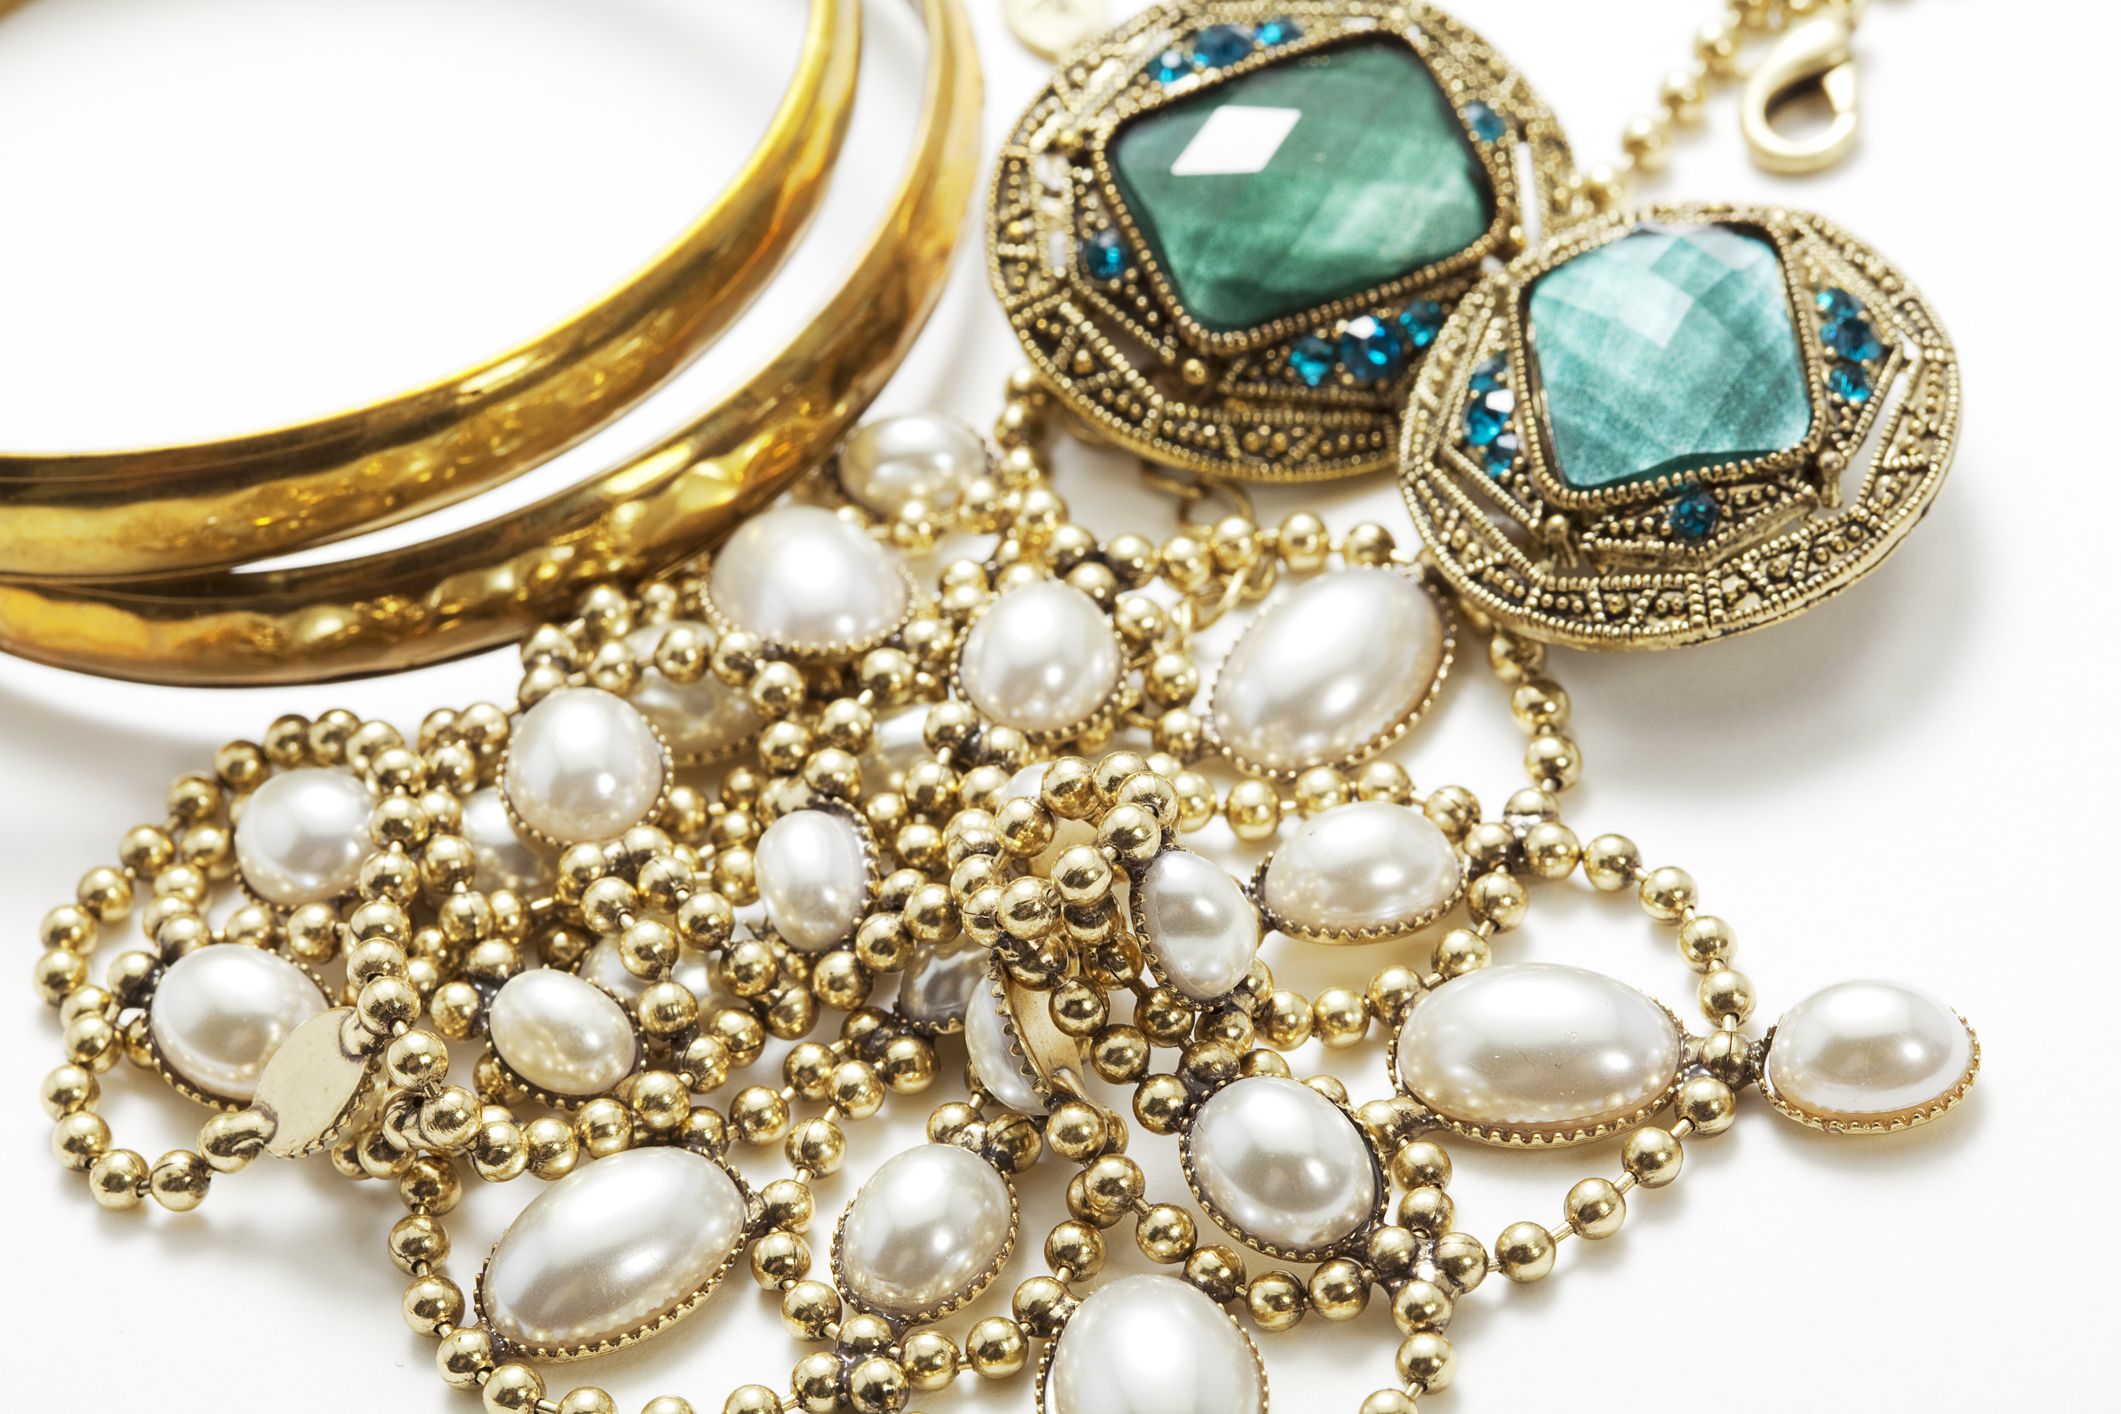 A Guide to Shopping for Vintage Jewelry